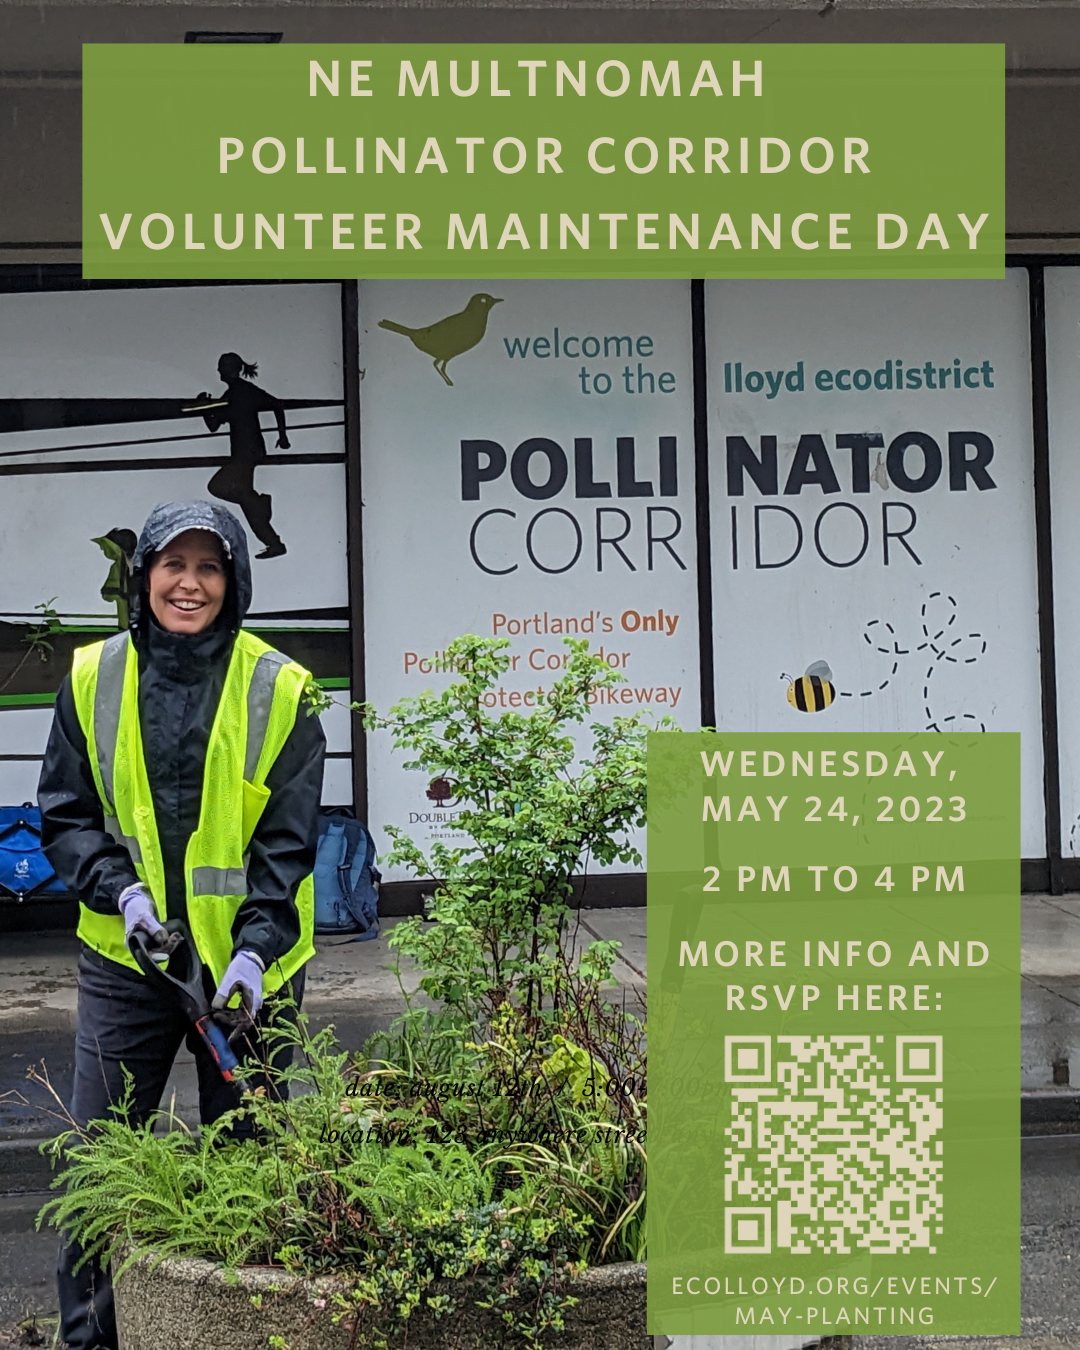 Poster featuring a women with a shovel and yellow safety vest standing by a planter along the Pollinator Corridor.